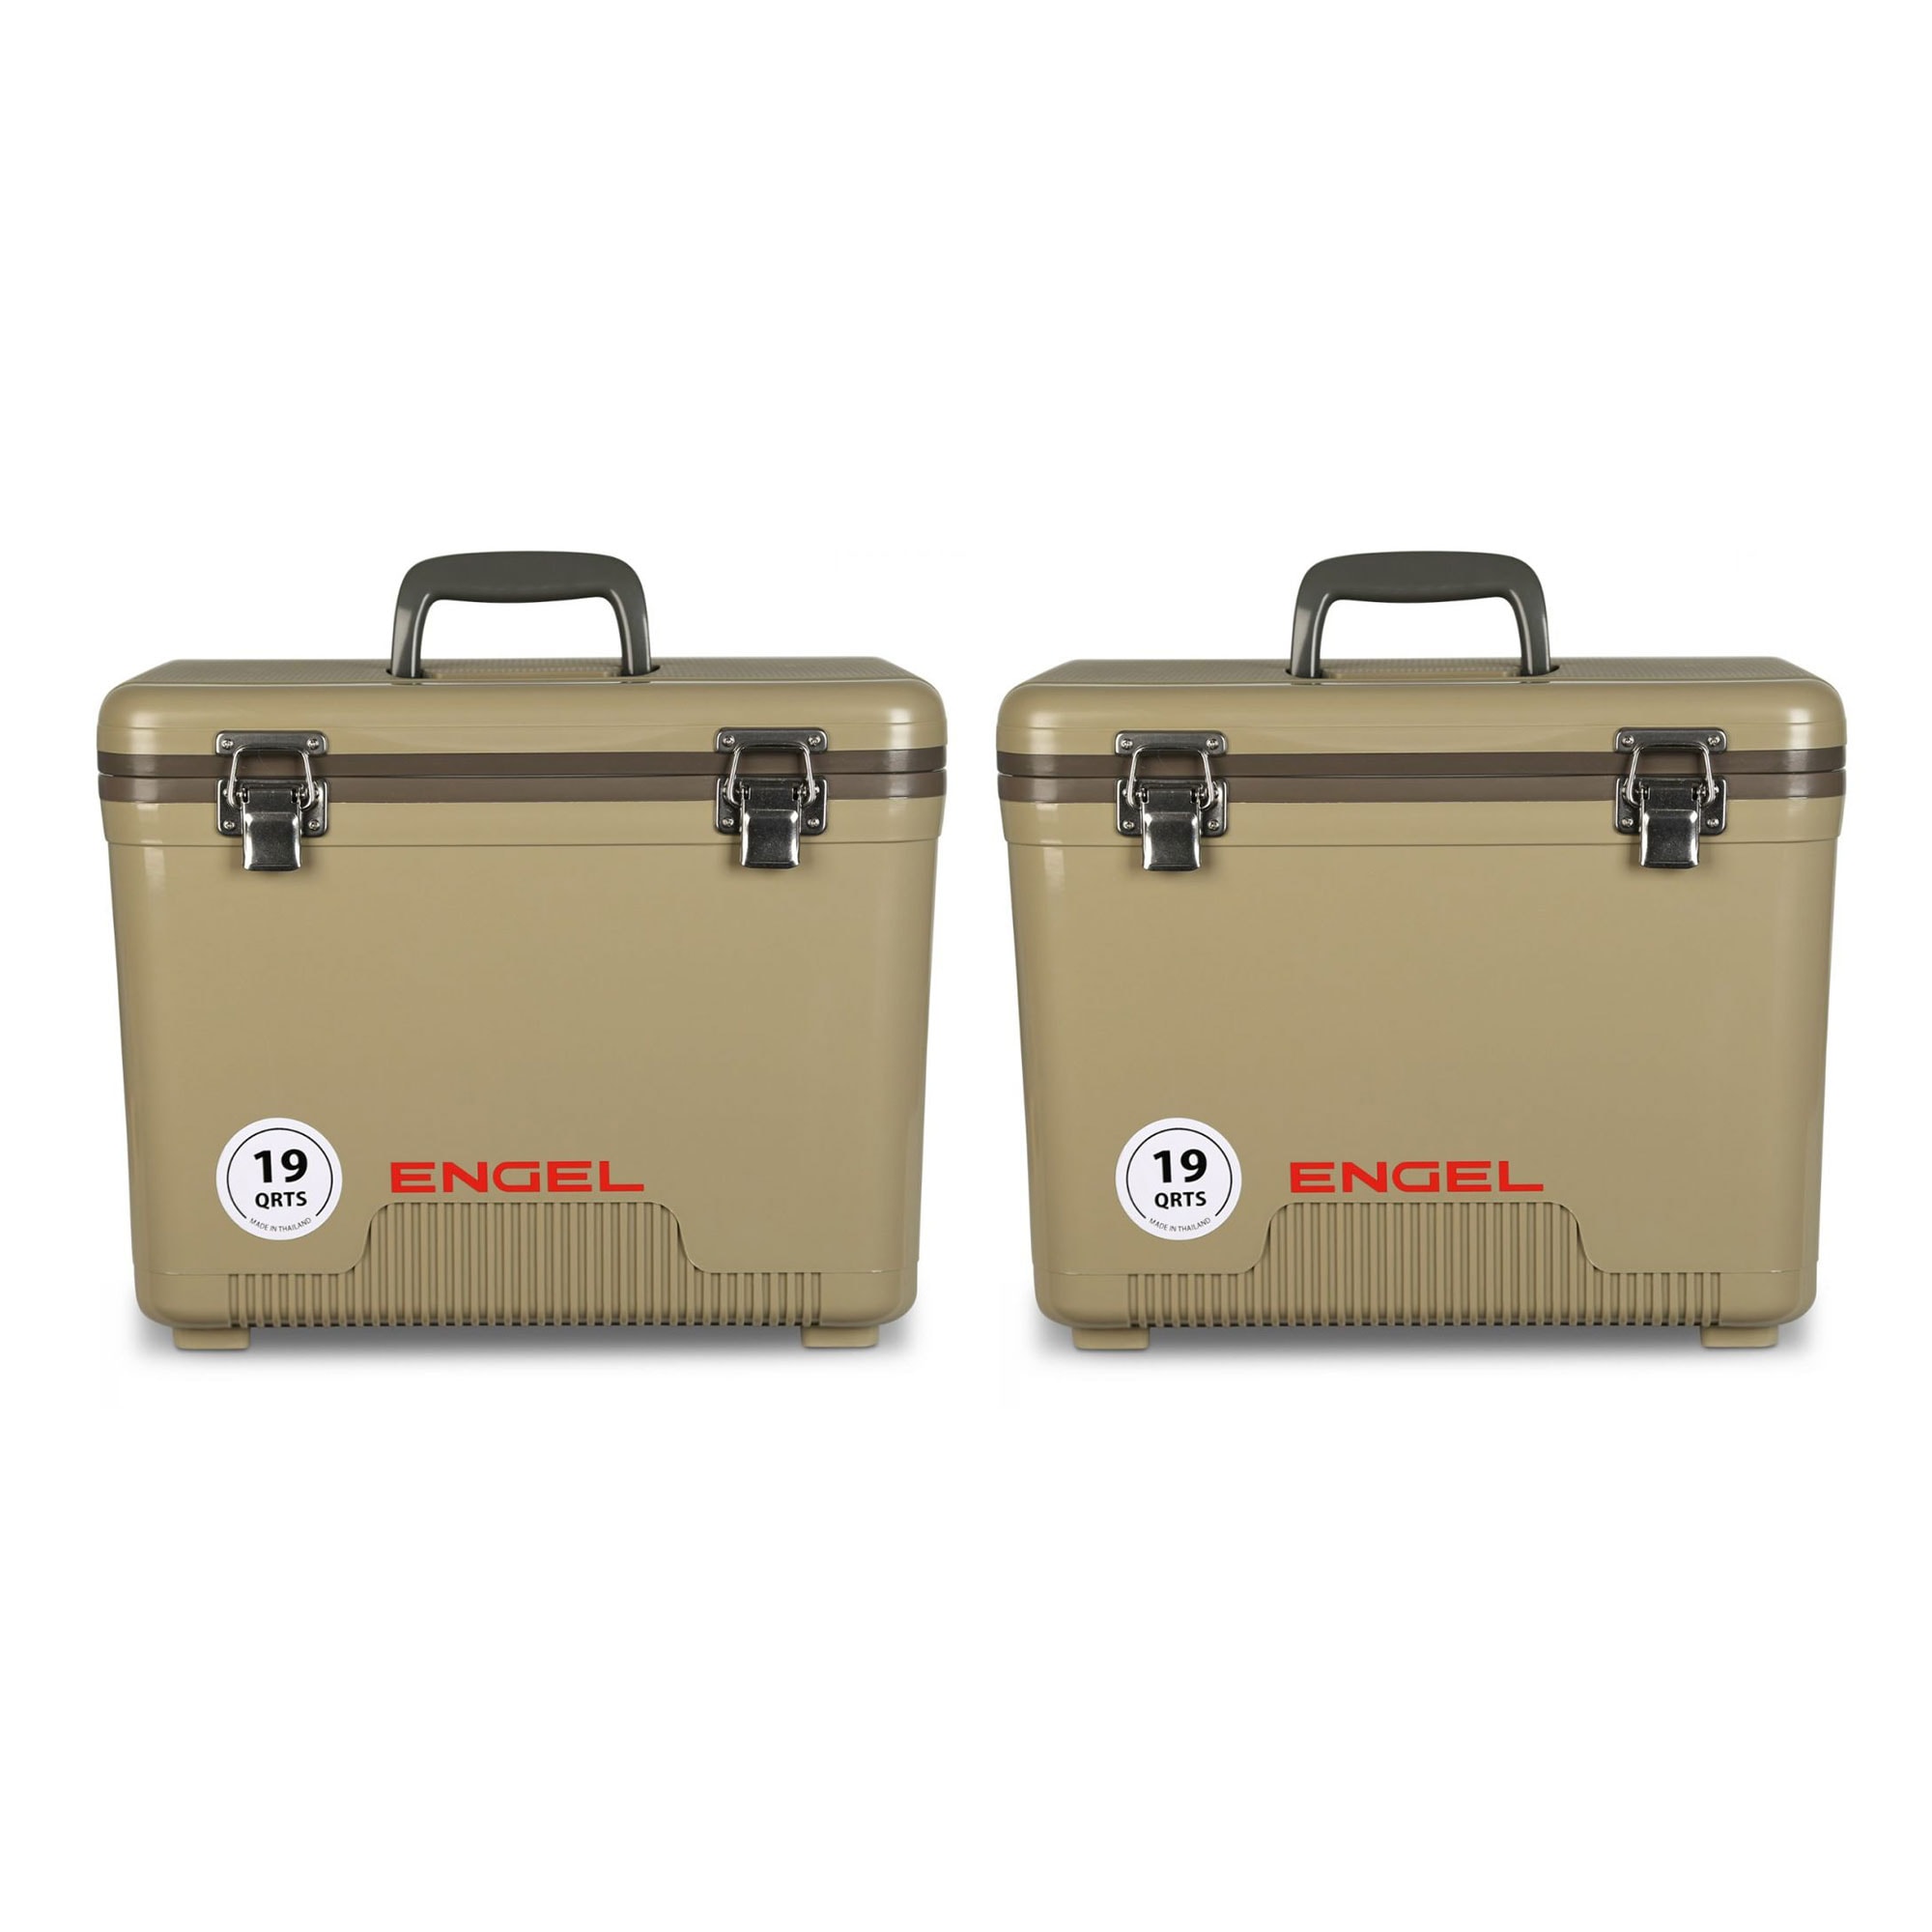 Engel Coolers Engel Tan Insulated Personal Cooler at